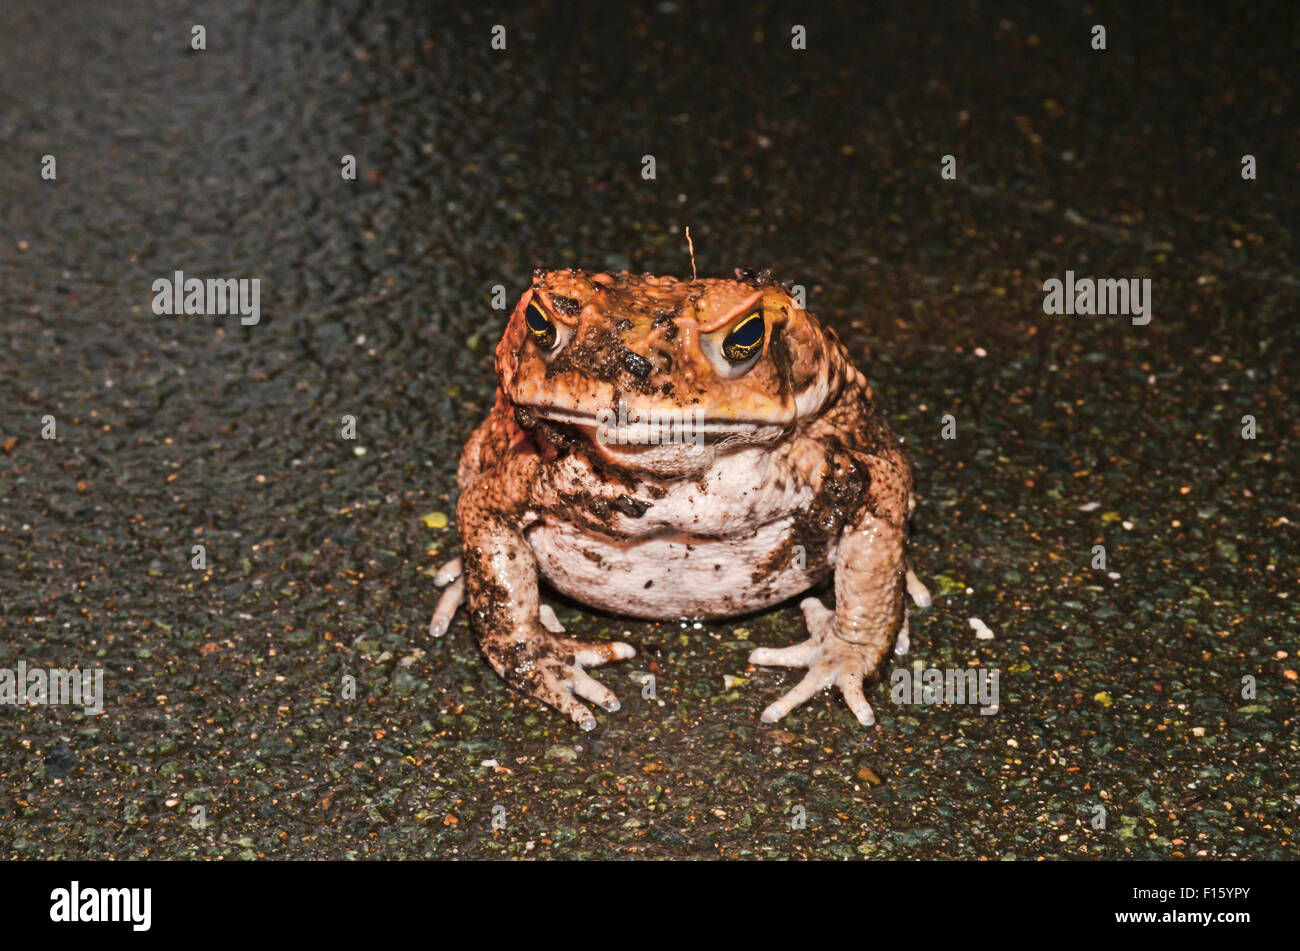 Front view of a Cane Toad Bufo marinus Stock Photo